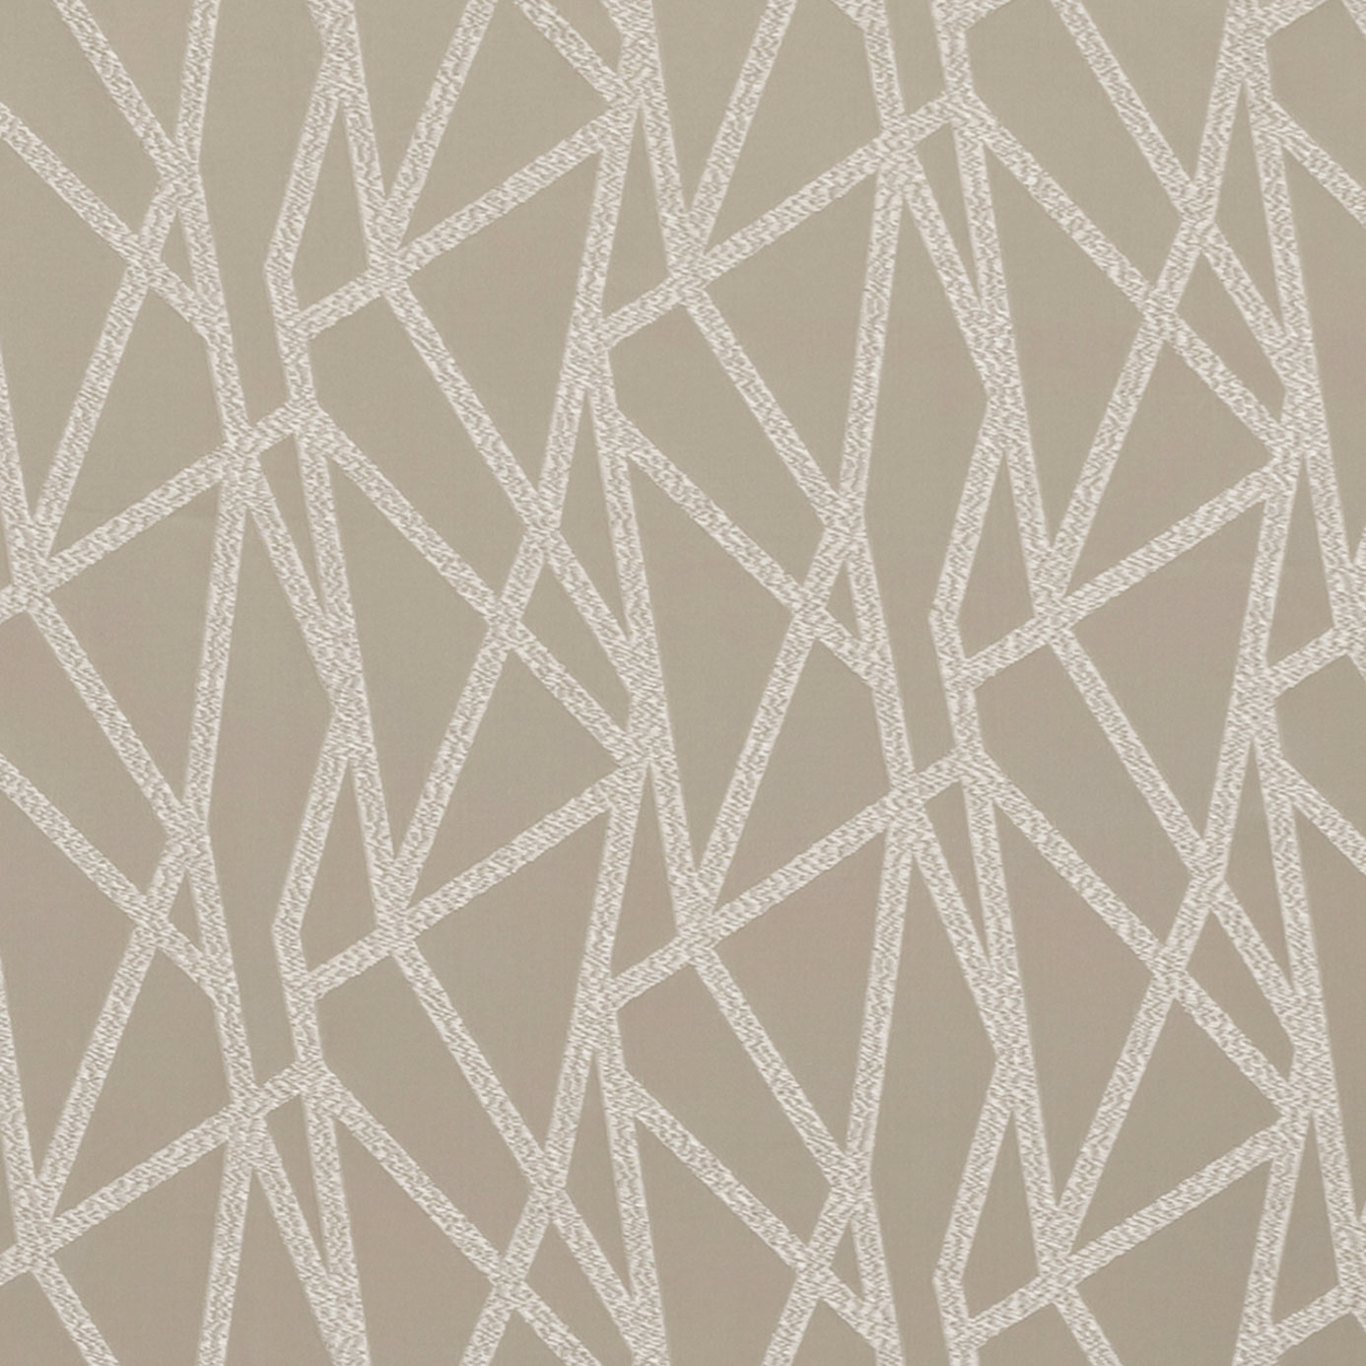 Geomo Taupe Fabric by STG